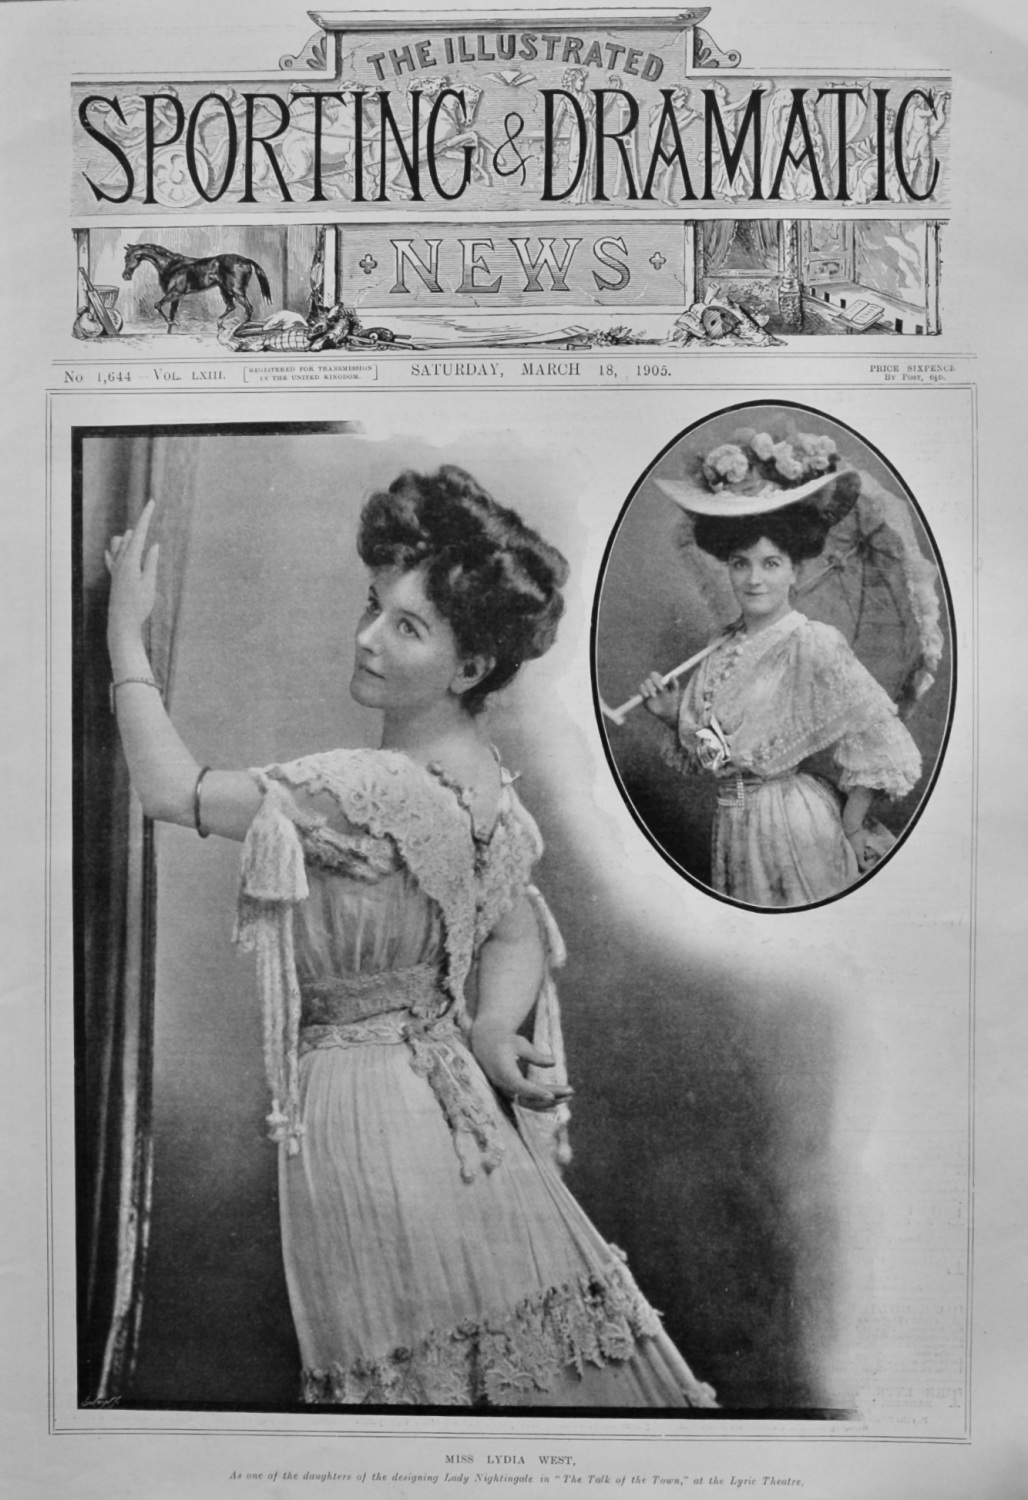 Miss Lydia West, as one of the daughters of the designing Lady Nightingale 